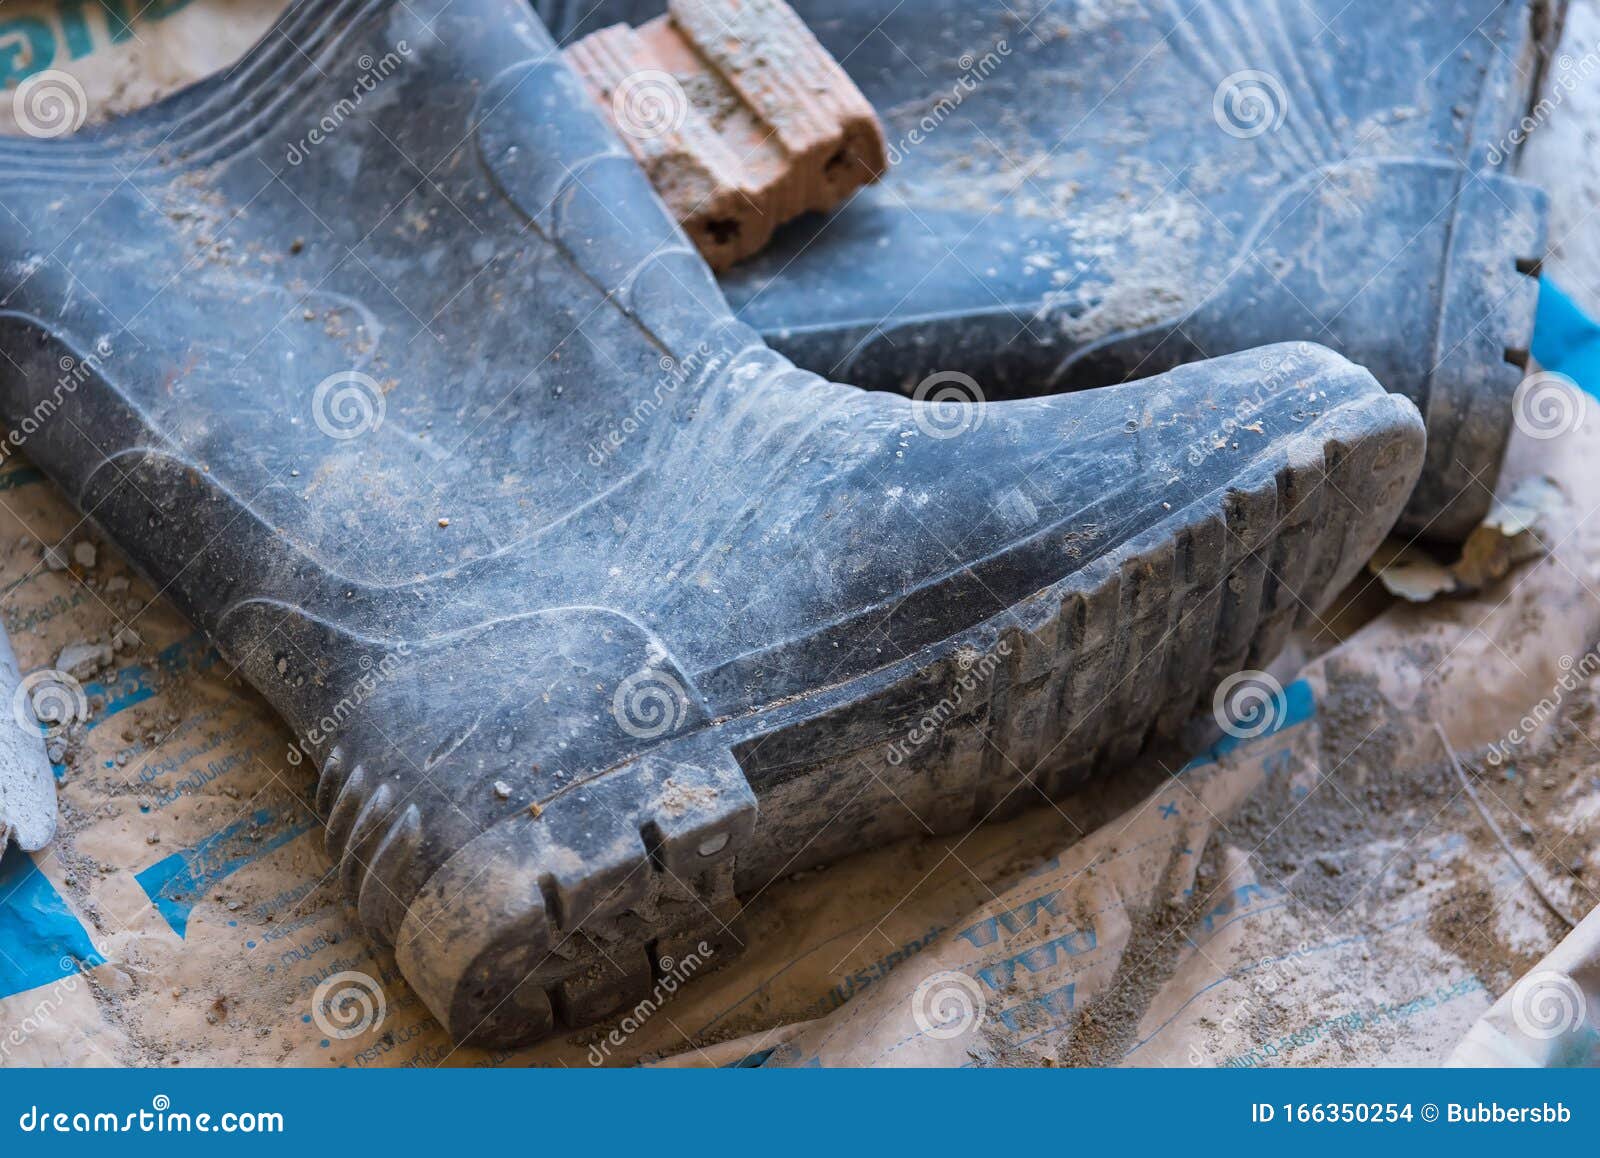 Dirty Rubber Boots of Workers in the Construction Site Stock Photo ...